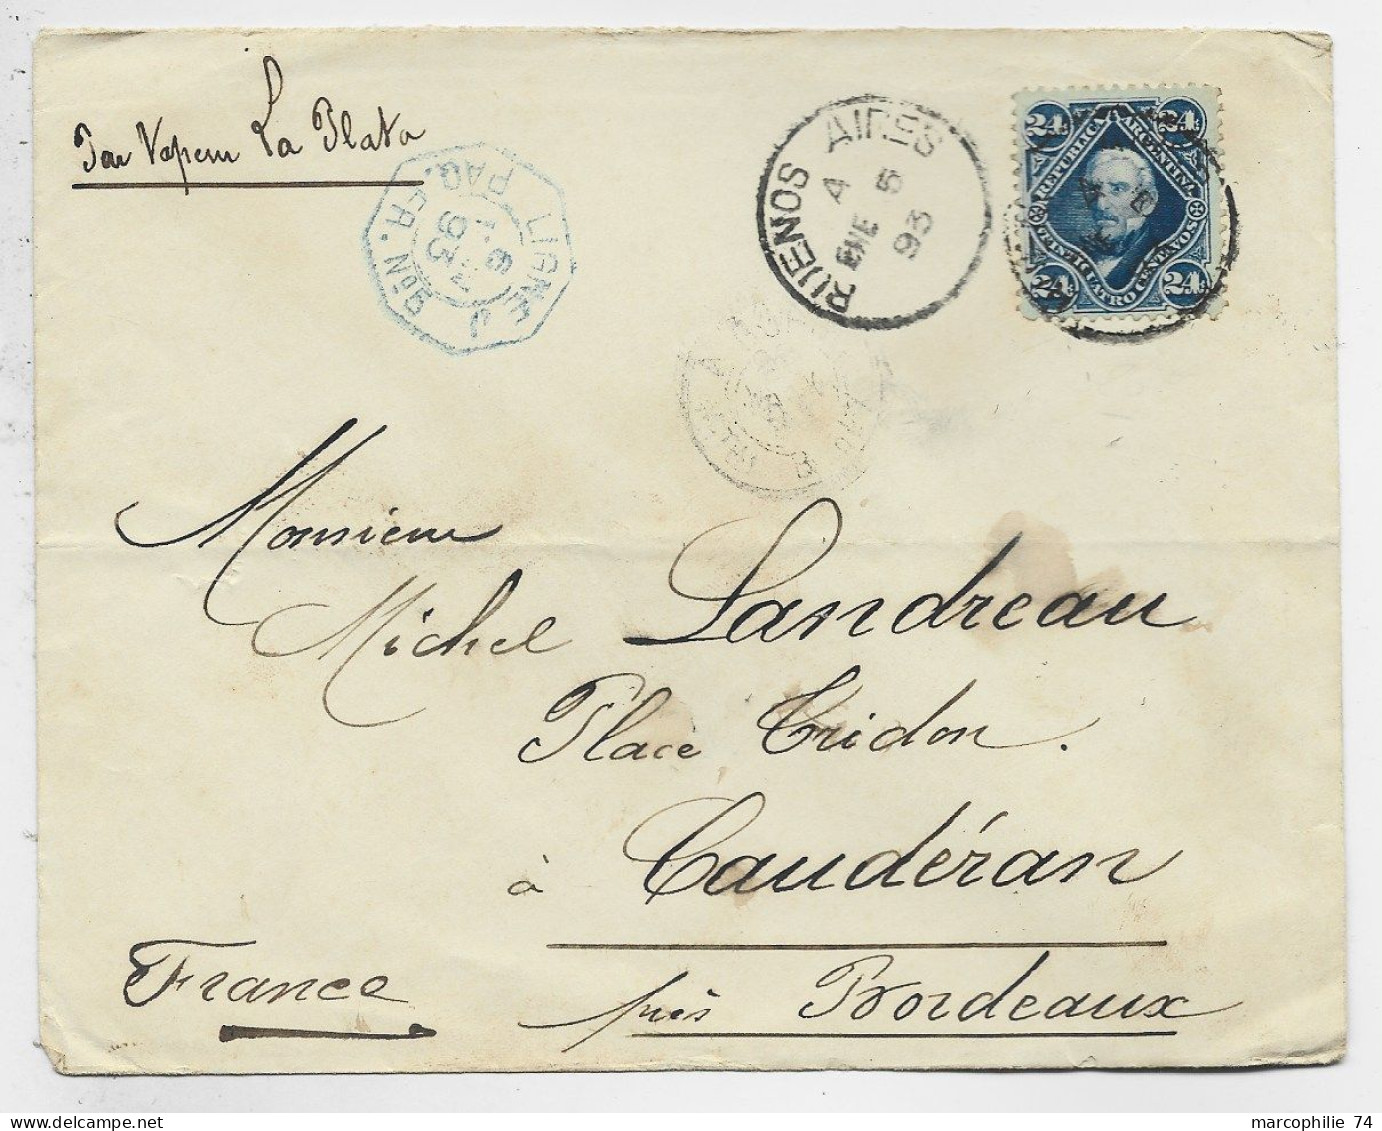 ARGENTINA 24C SOLO LETTRE COVER BUENOS AIRES 1893  TO FRANCE PAR BRESIL - Covers & Documents